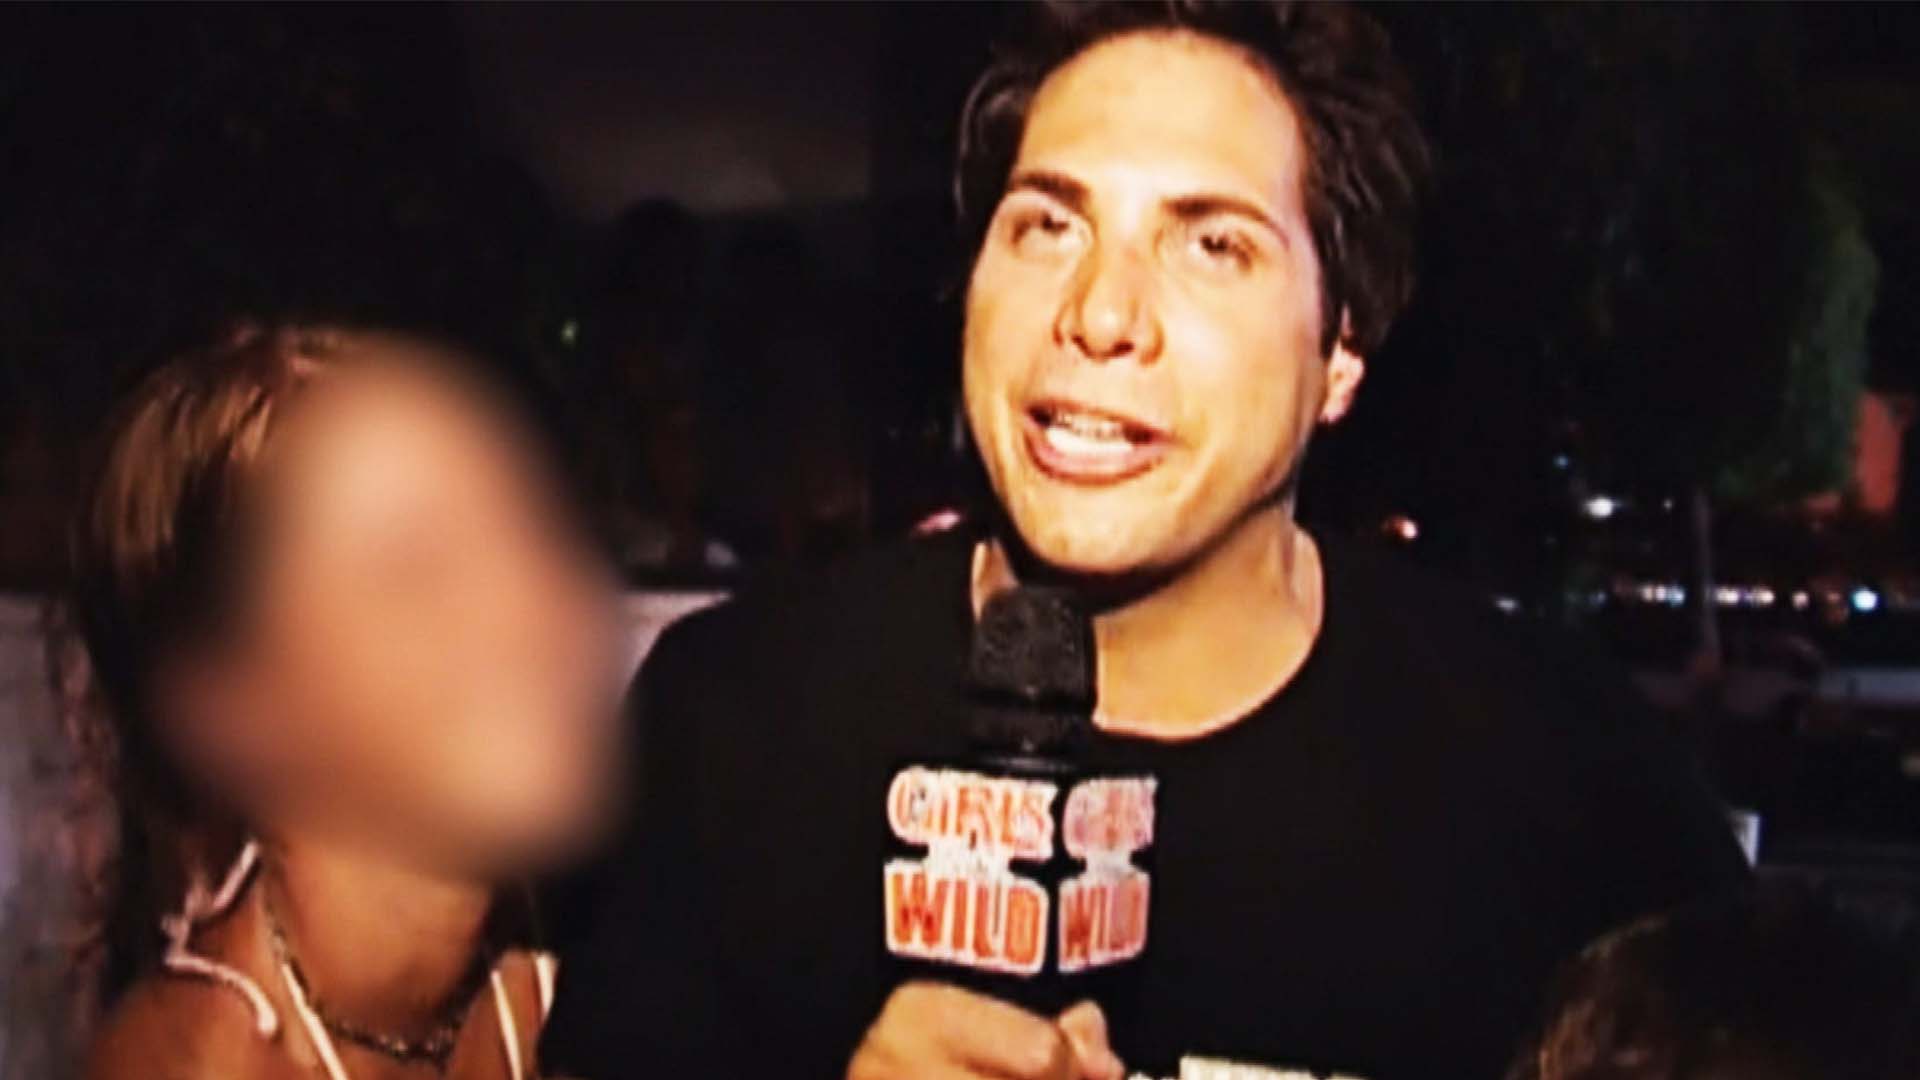 Handcuff Porn Ggw - Abuse Allegations Against 'Girls Gone Wild' Founder Air in Documentary |  Inside Edition